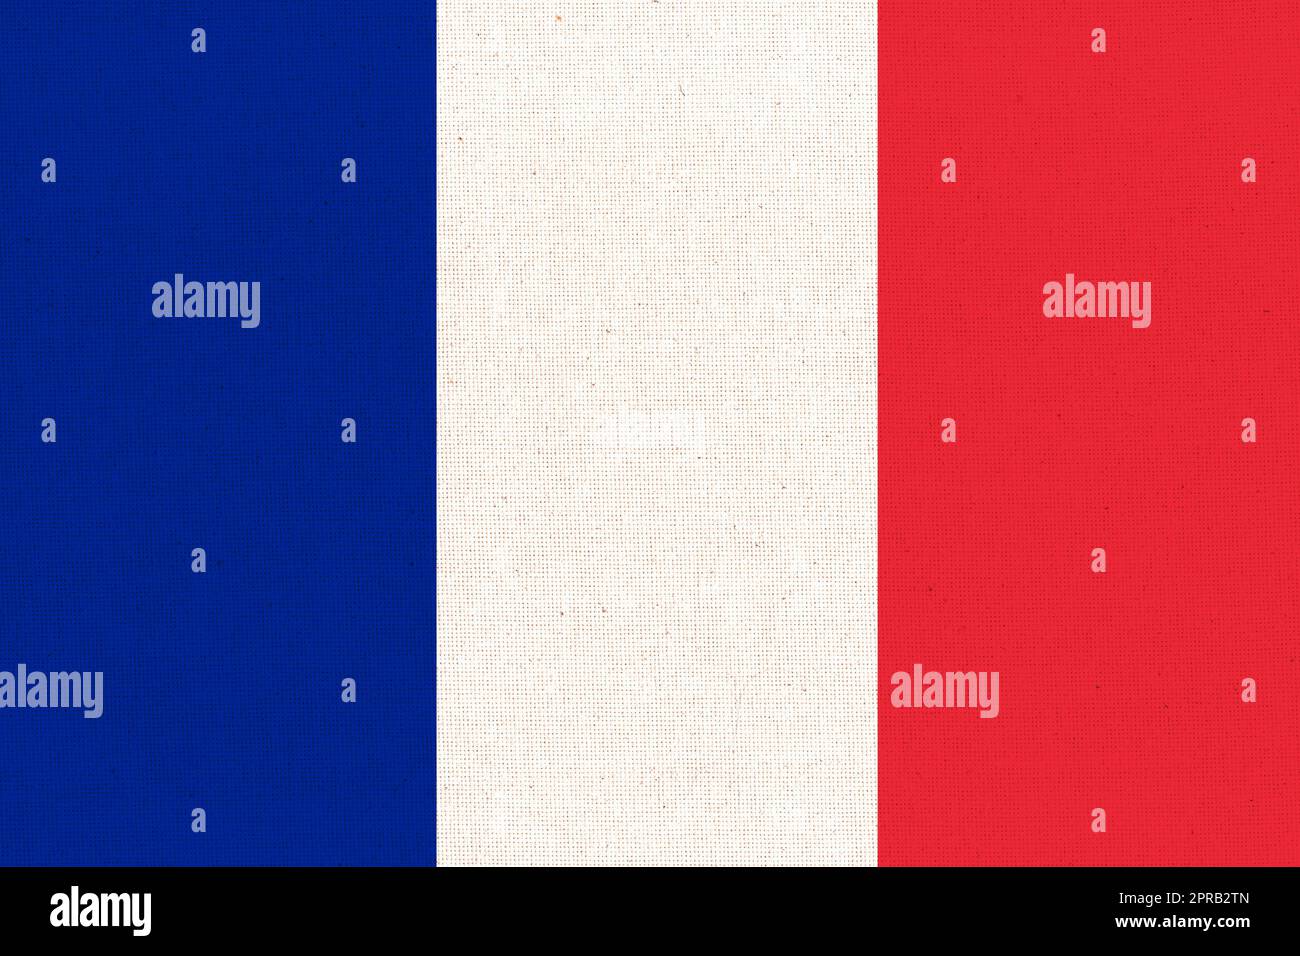 Flag of france. French flag on fabric surface. Fabric texture Stock Photo